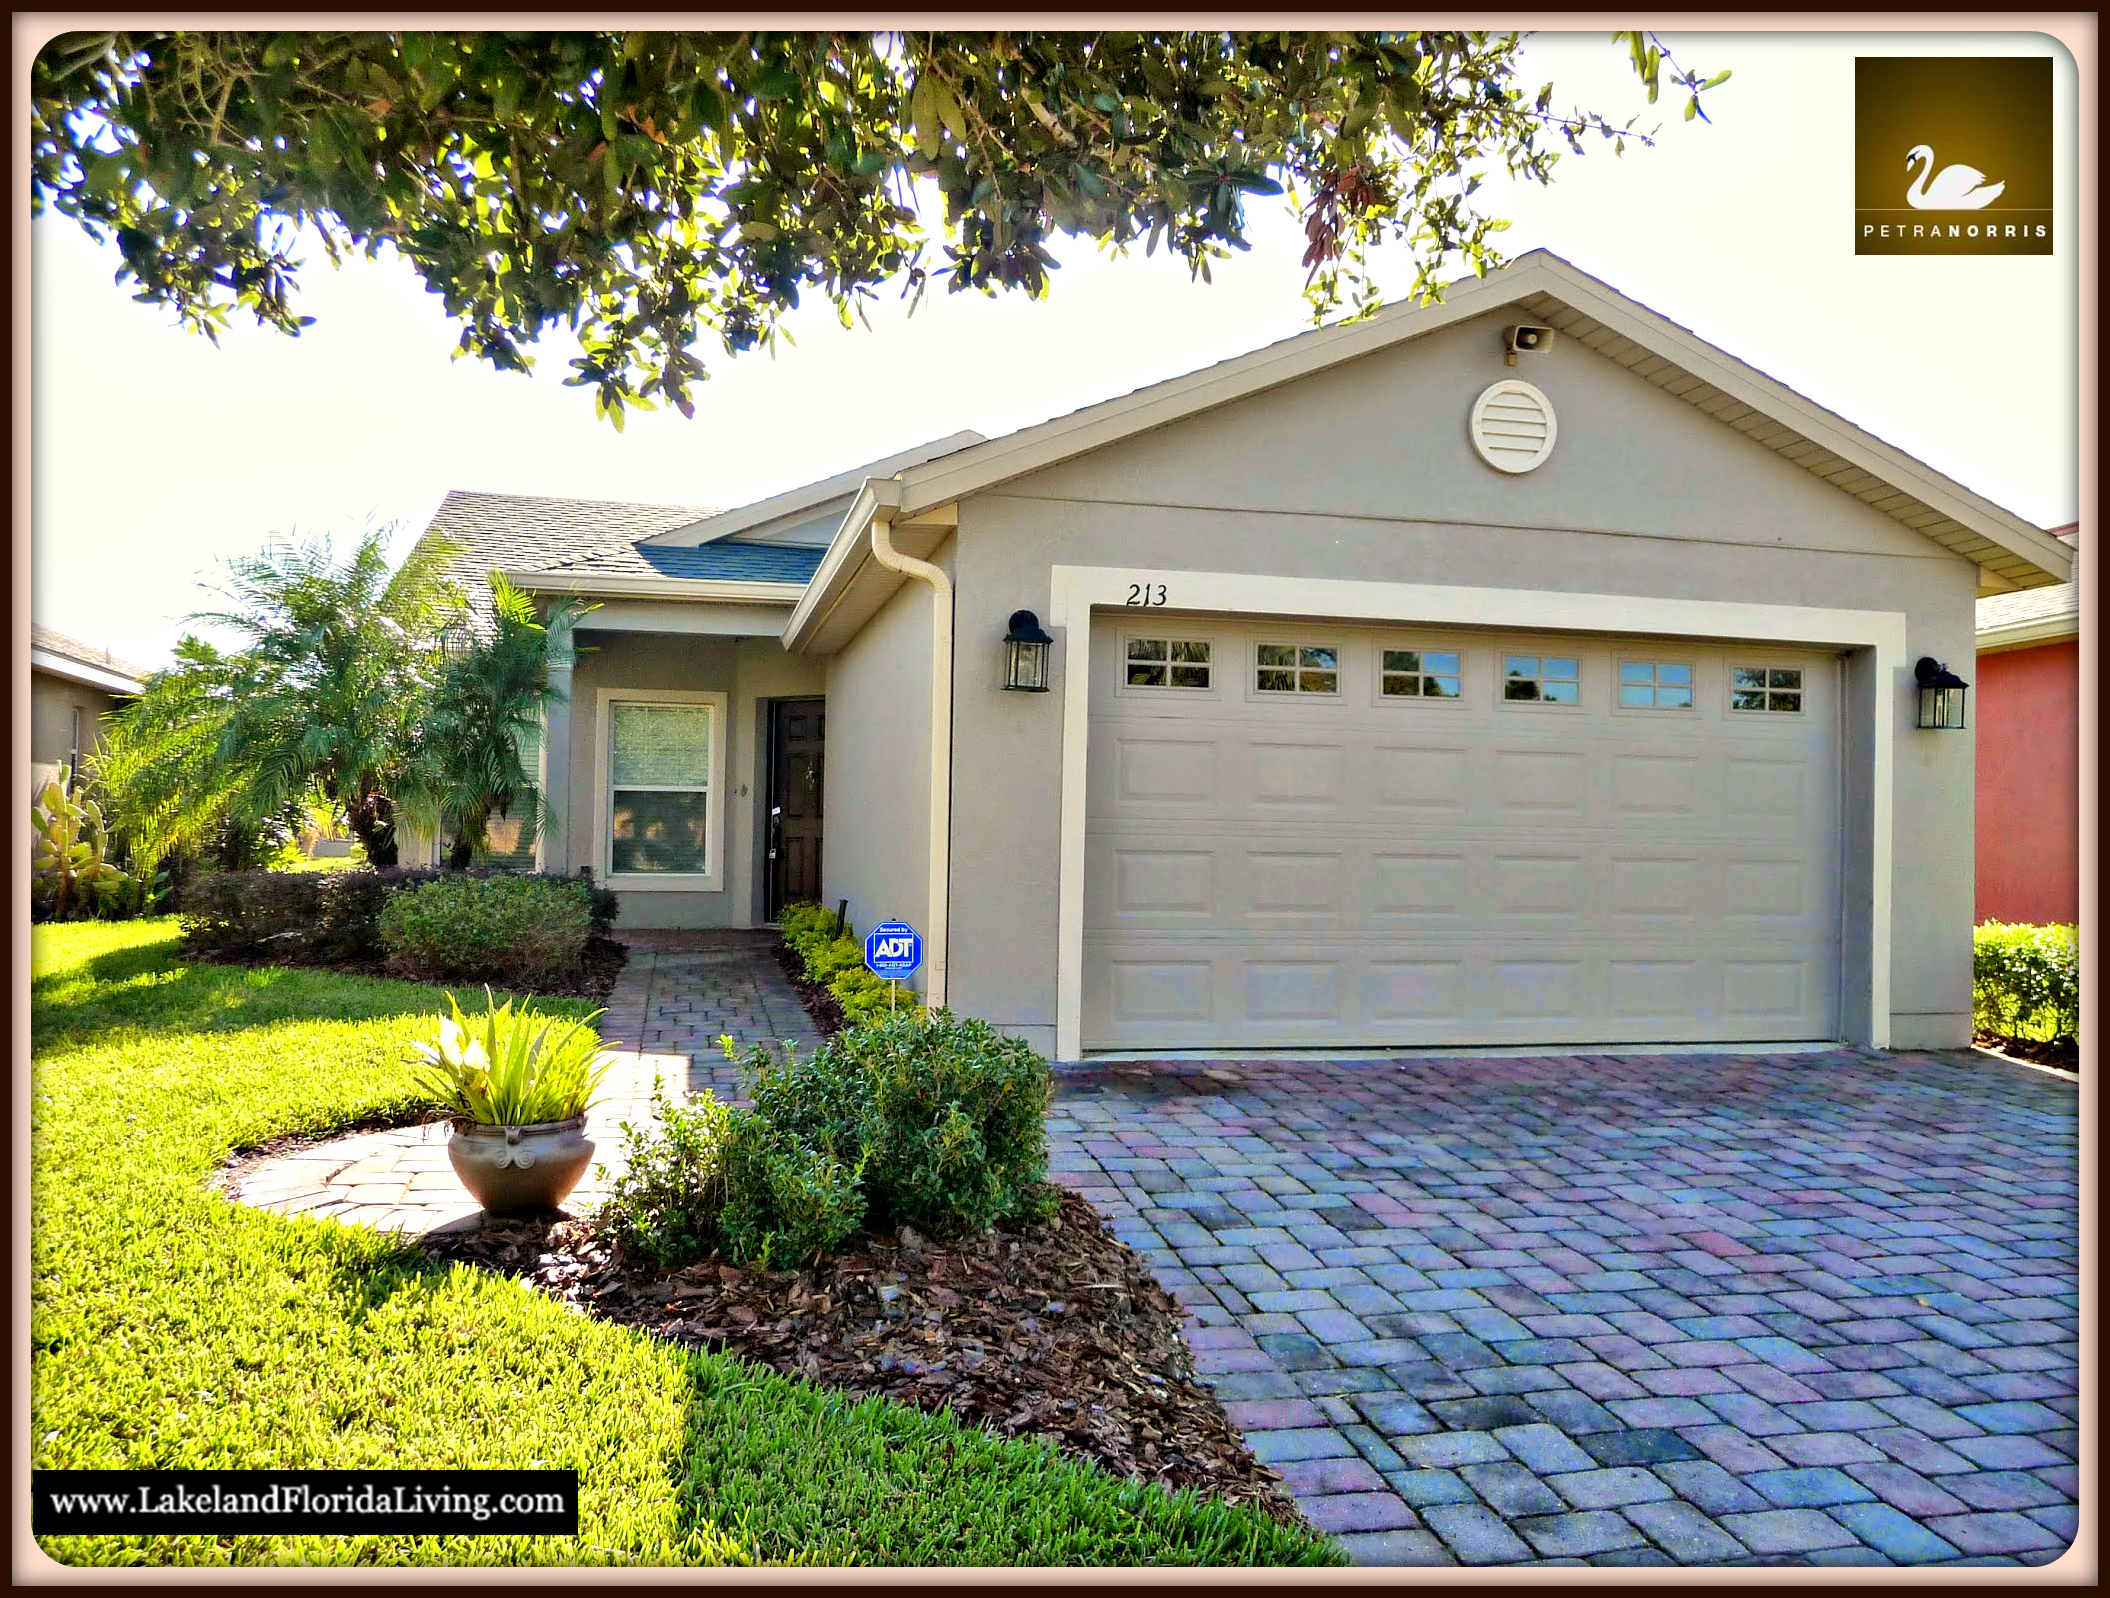 Home for Sale in Solivita Community FL - 213 Grand Canal Dr - 001 Front 1